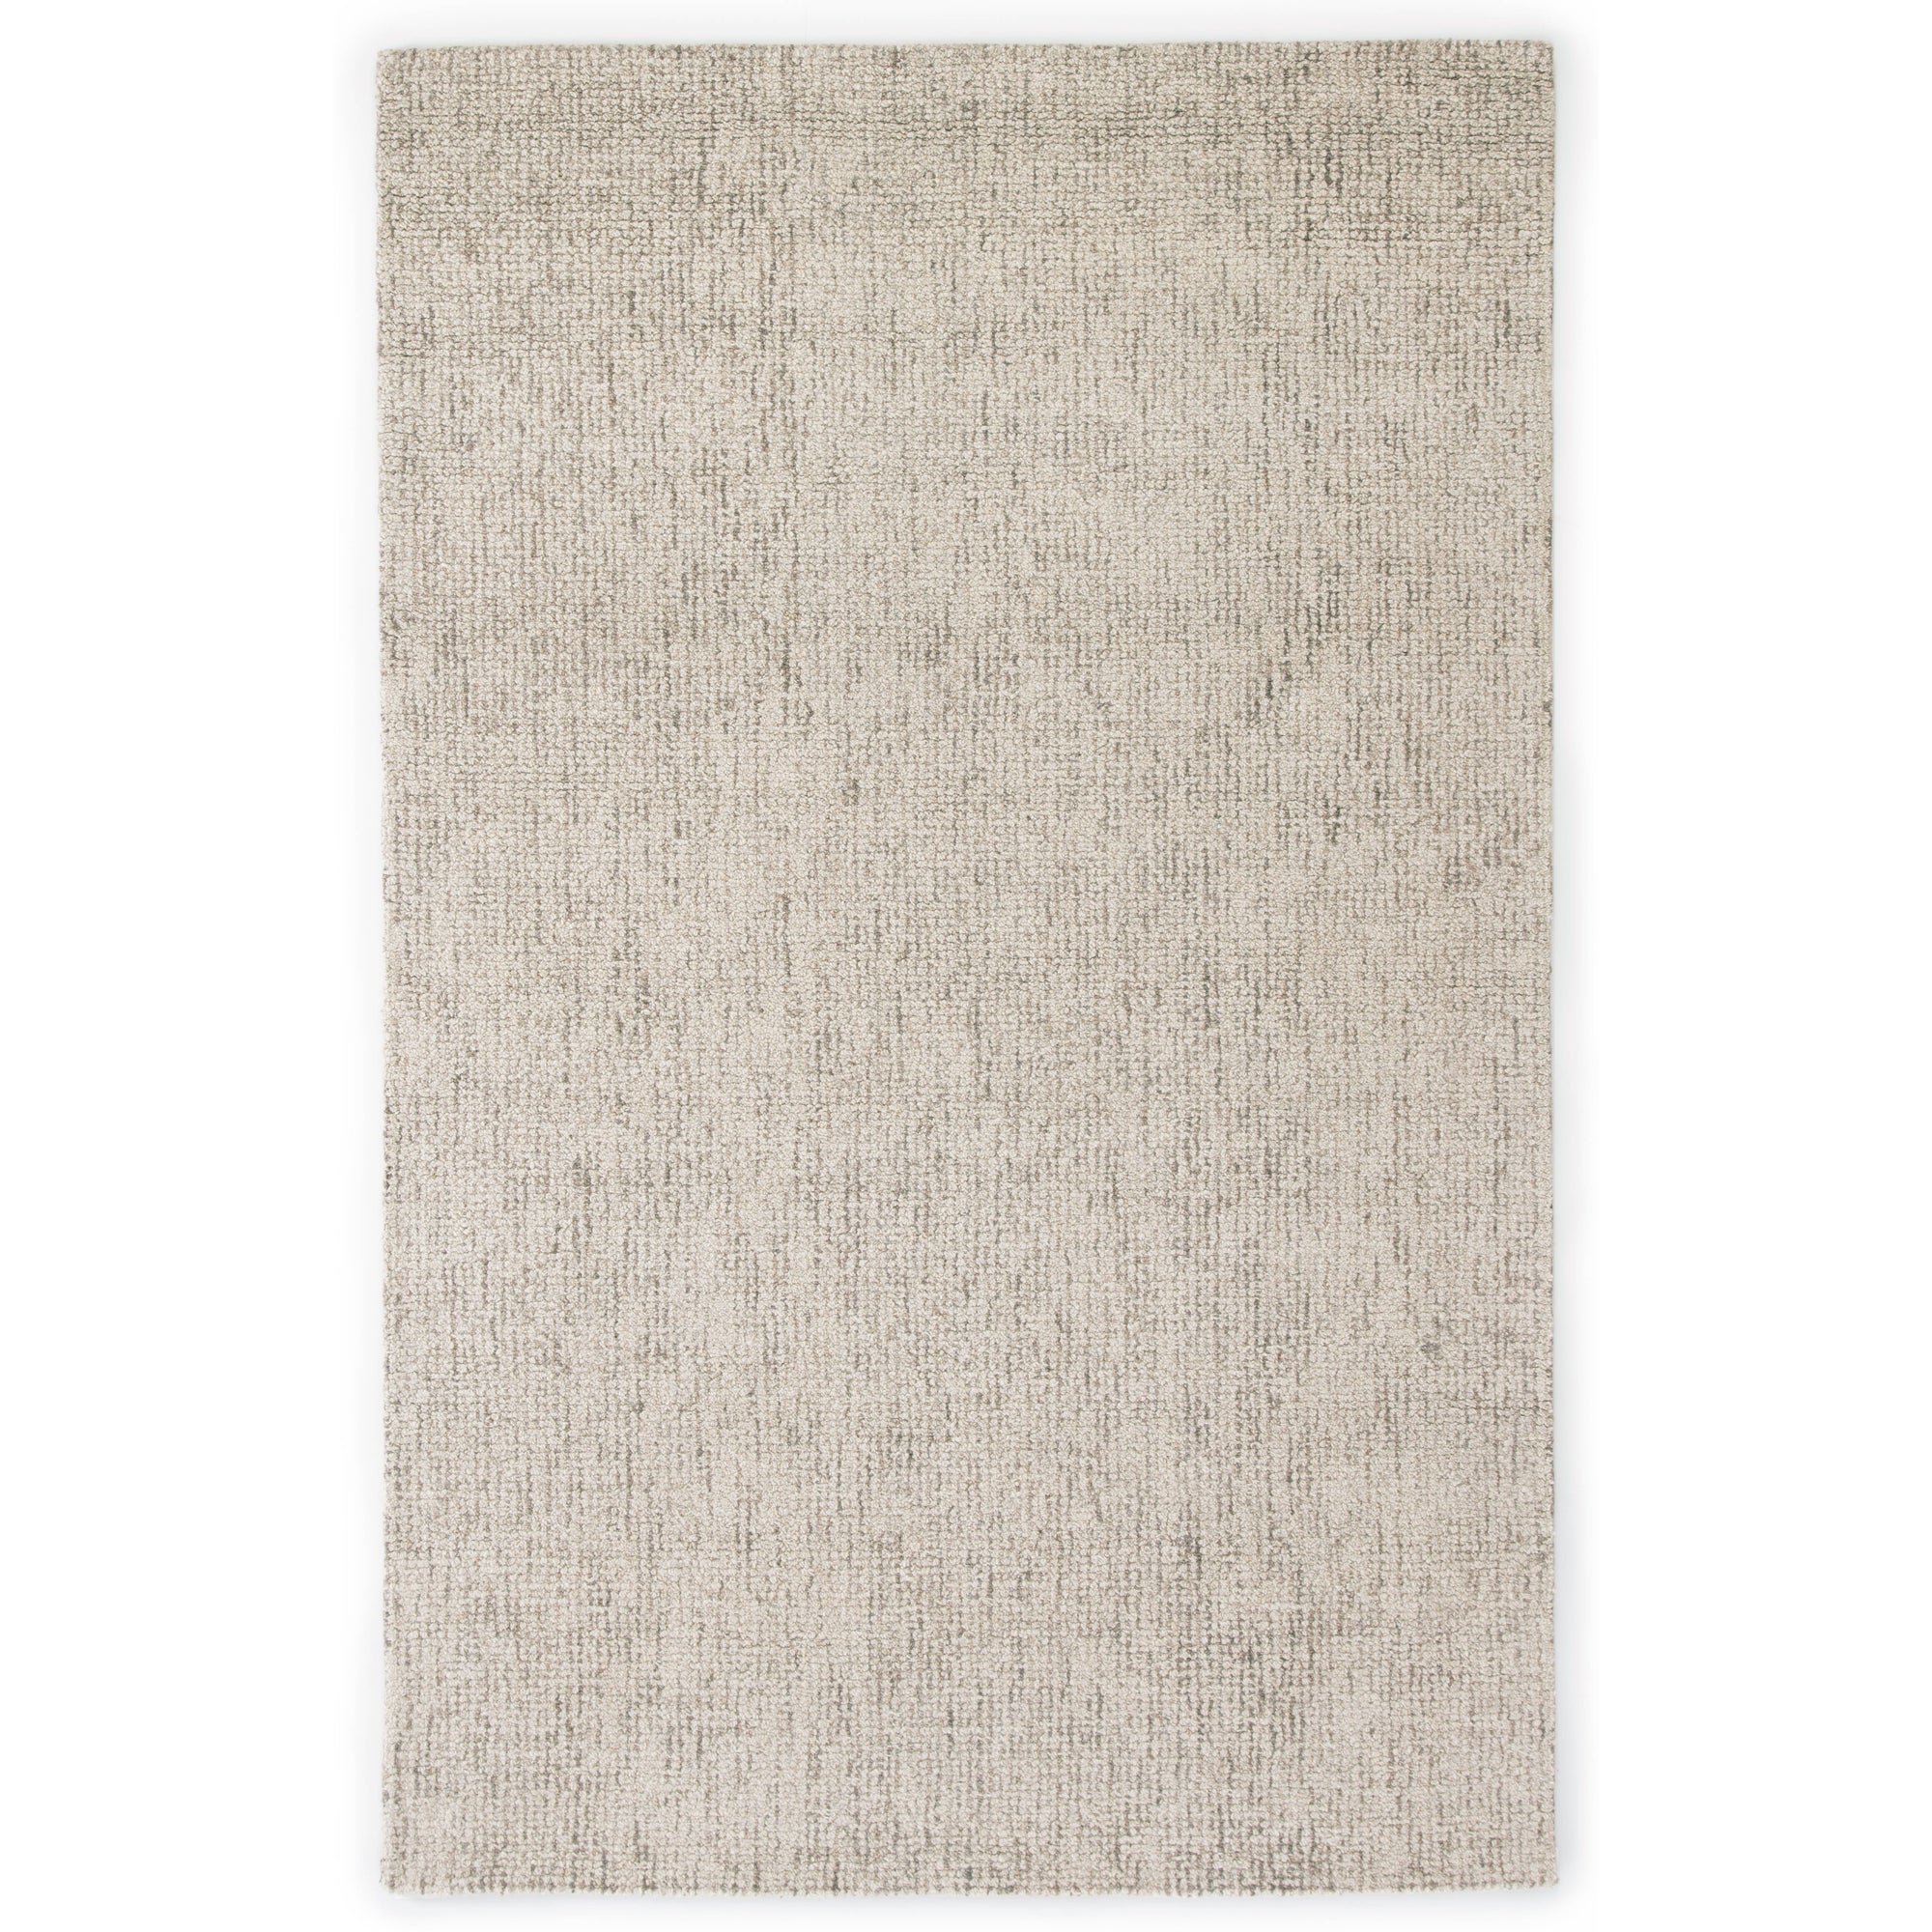 Rugs by Roo | Jaipur Living Oland Handmade Solid White Brown Area Rug-RUG113083